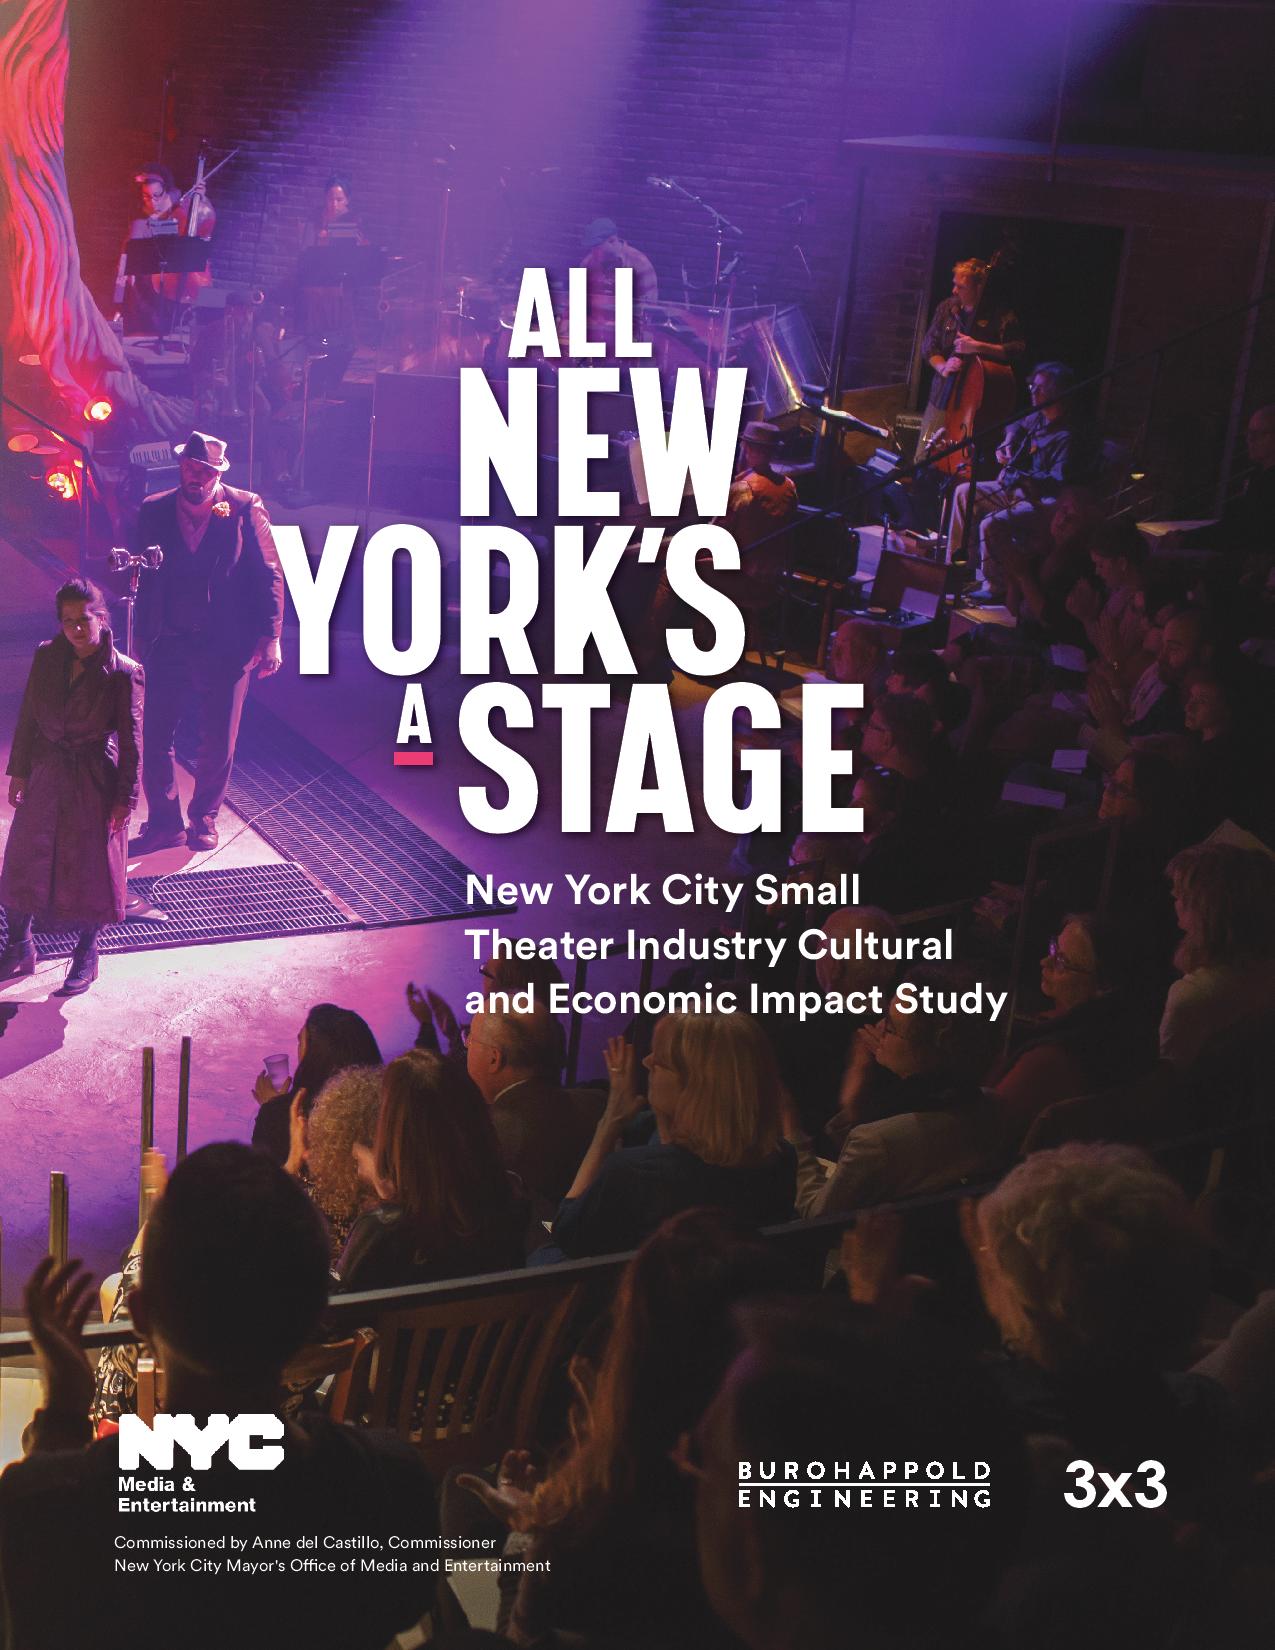 Small Theater Industry Cultural and Economic Impact Study